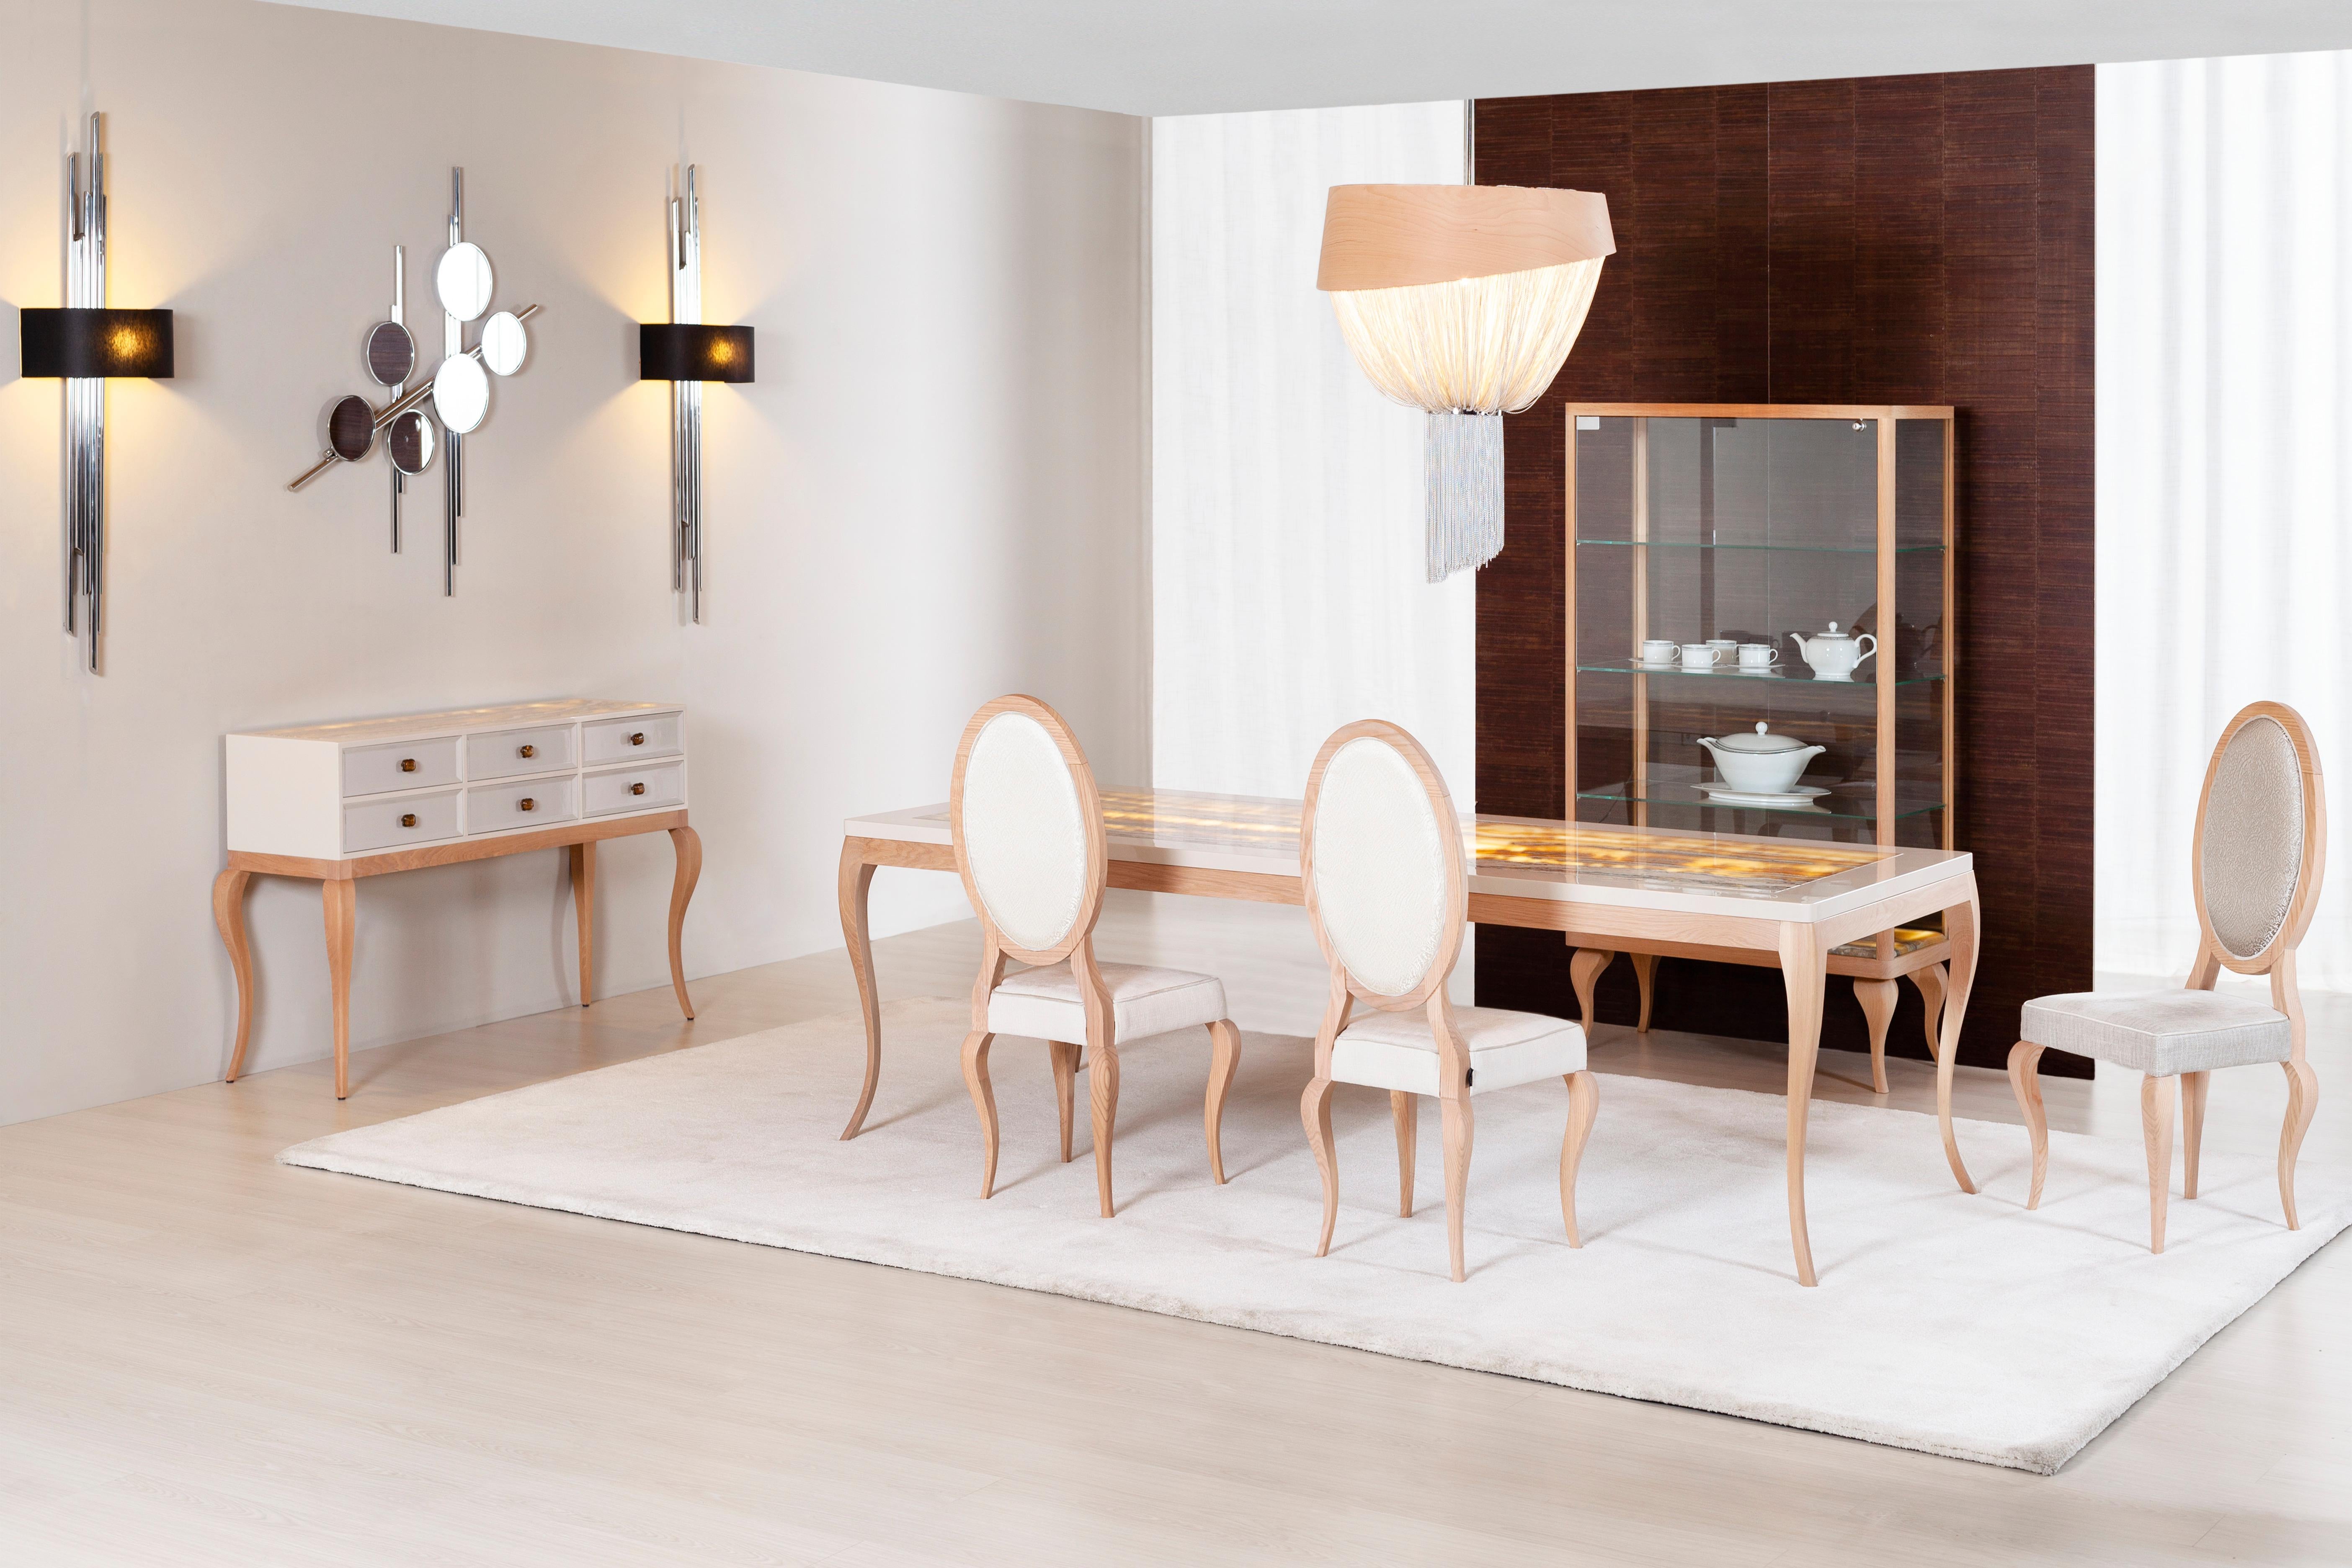 Veneza dining table, Modern collection, handcrafted in Portugal - Europe by GF Modern.

Veneza dining table represents the dawn of a new modern era. The beige table top is enhanced with a stunning shadow onyx inlay, complementing the legs in